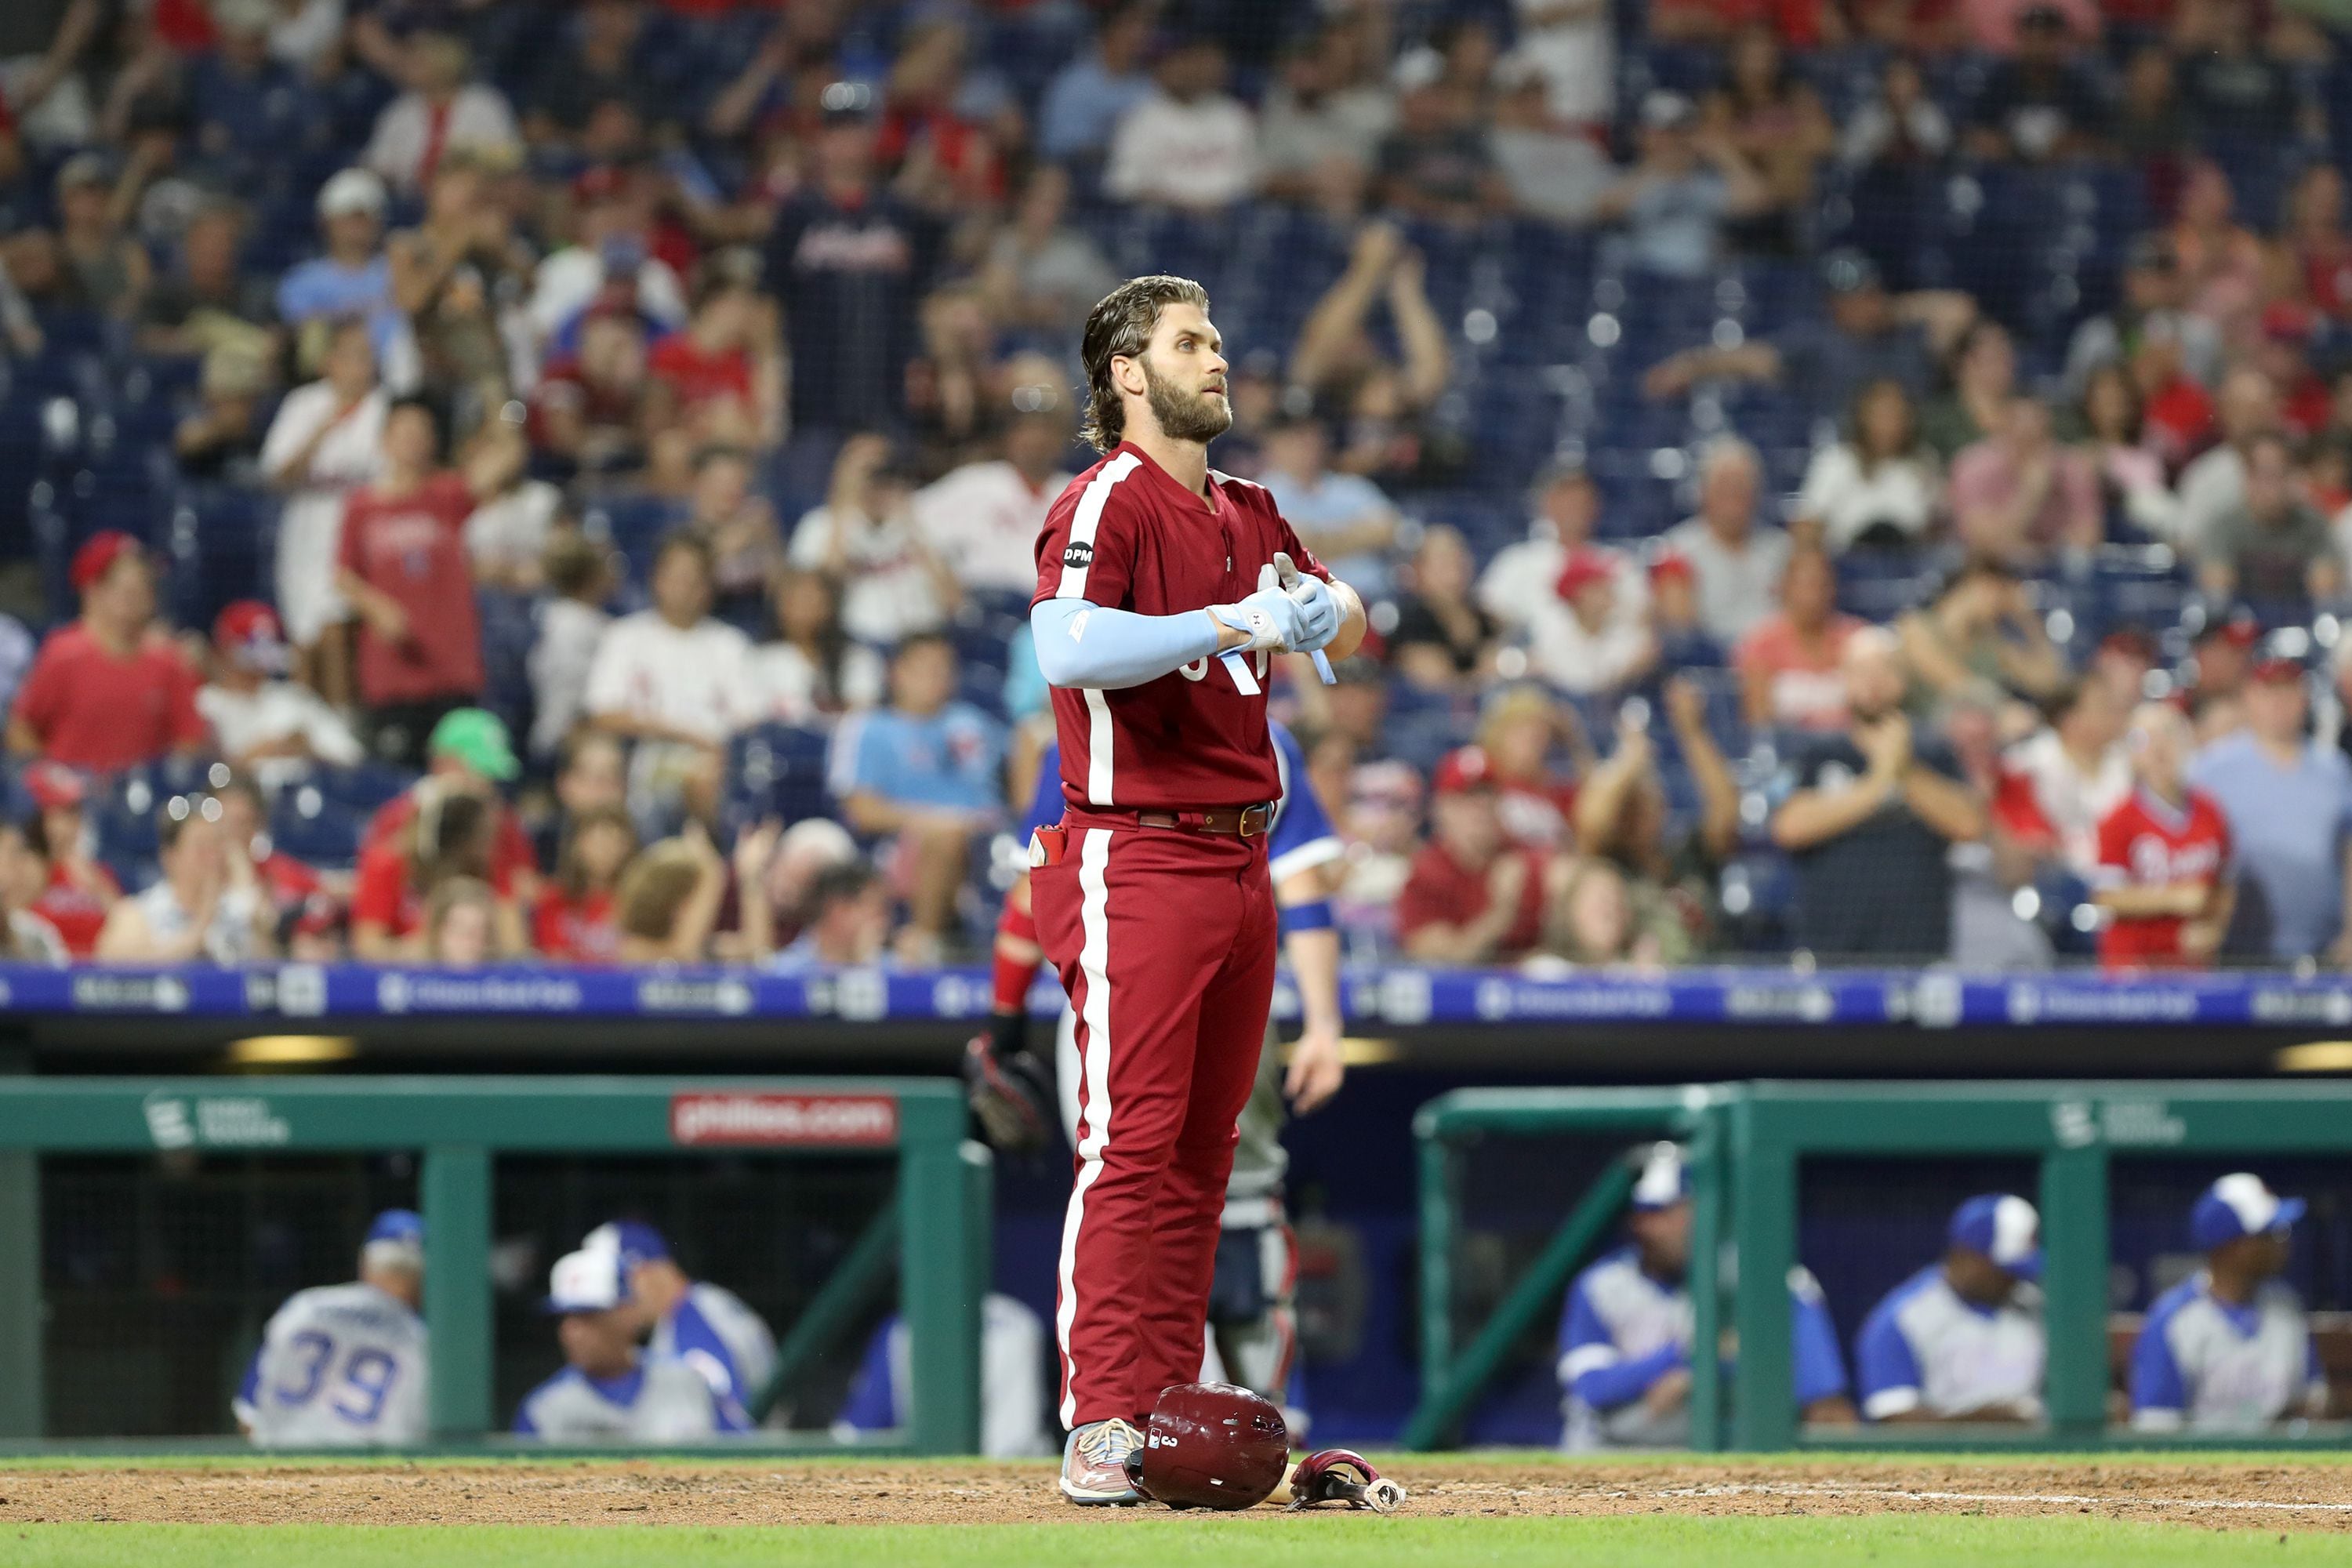 Phillies fall to Braves for embarrassing, ugly loss in burgundy uniforms